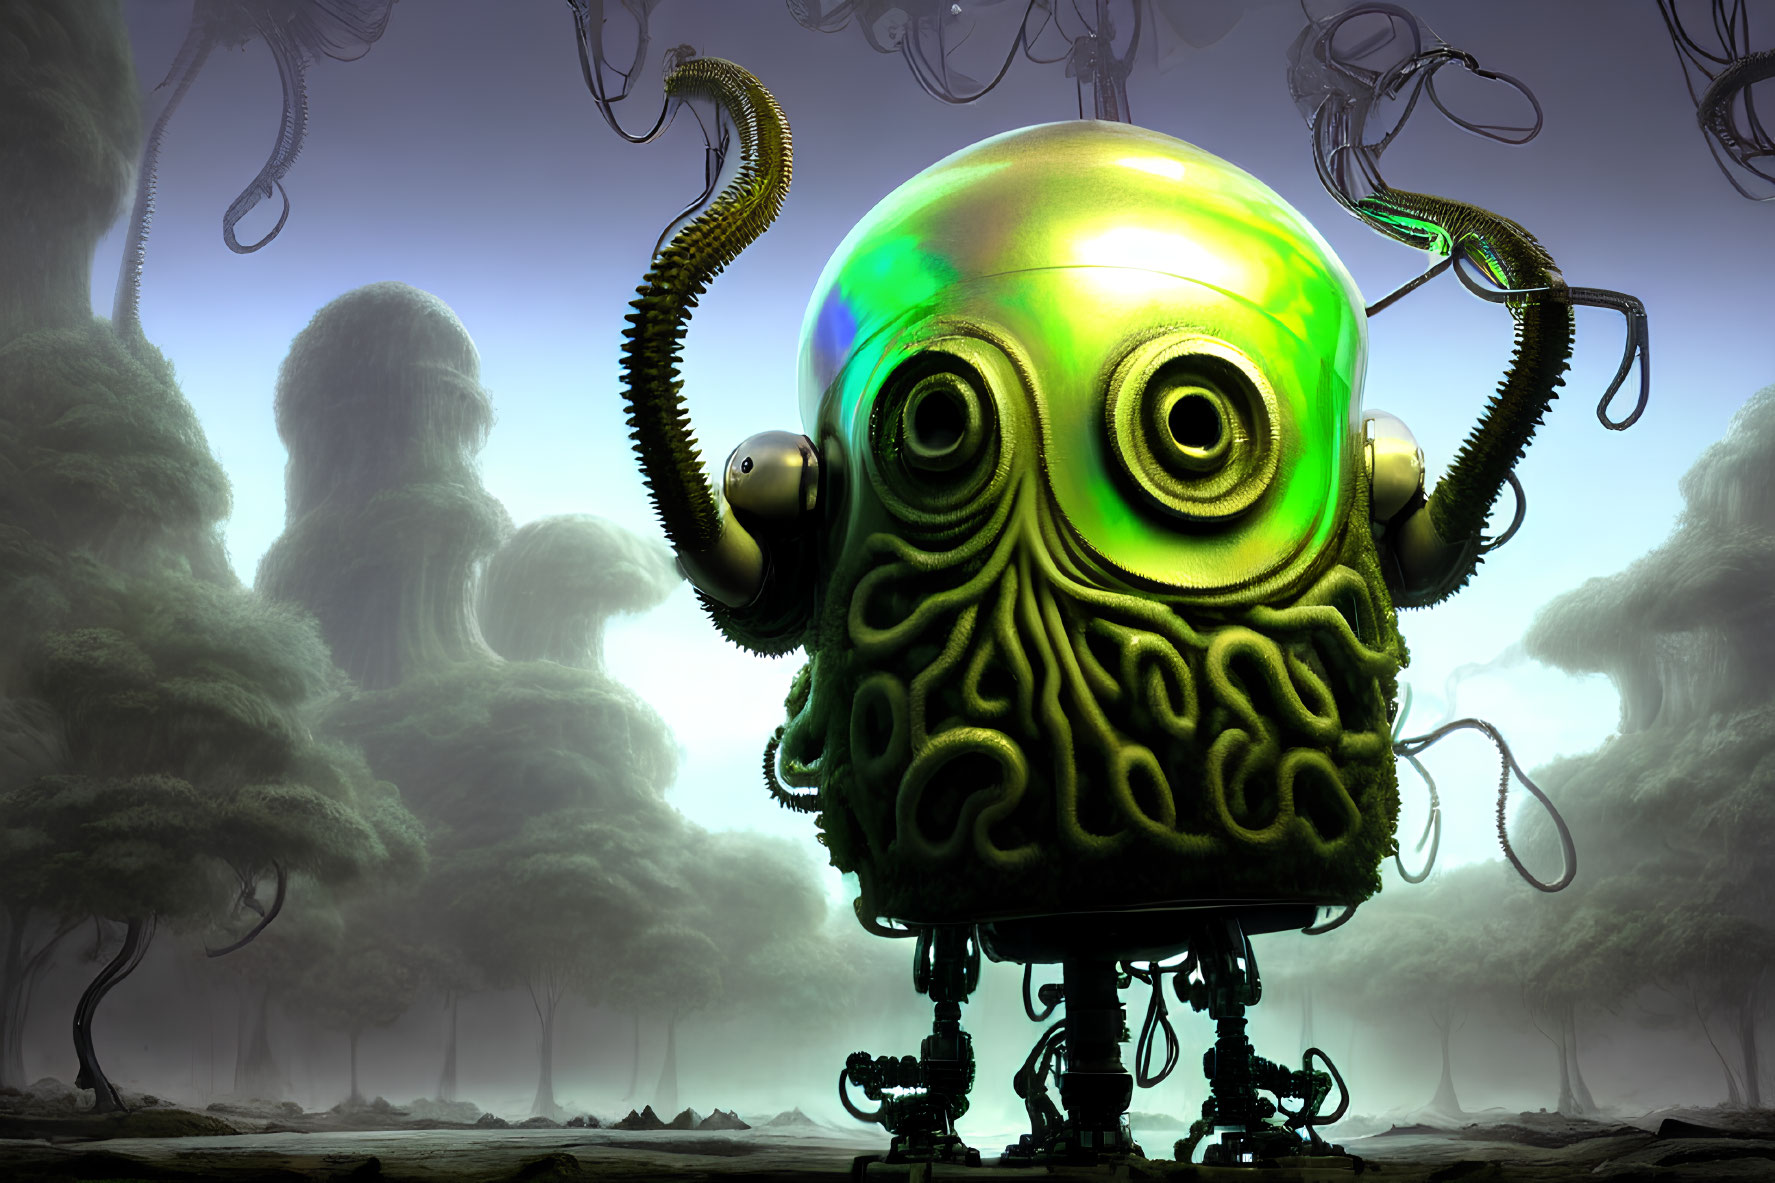 Glowing green robotic octopus in misty forest with vines